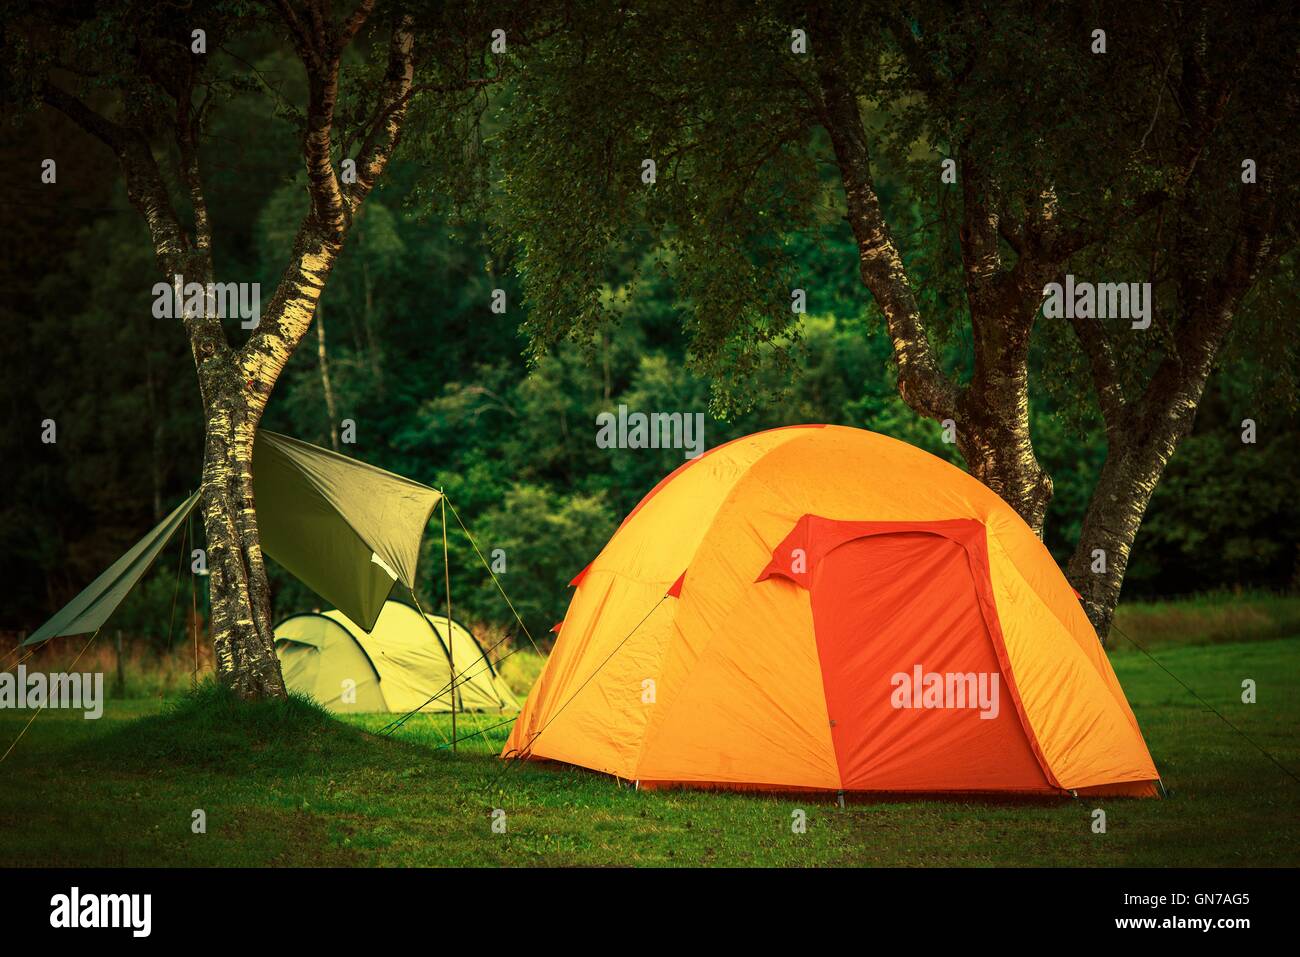 Small Orange Tent Camping. Wilderness Camping Theme. Campground Place. Stock Photo